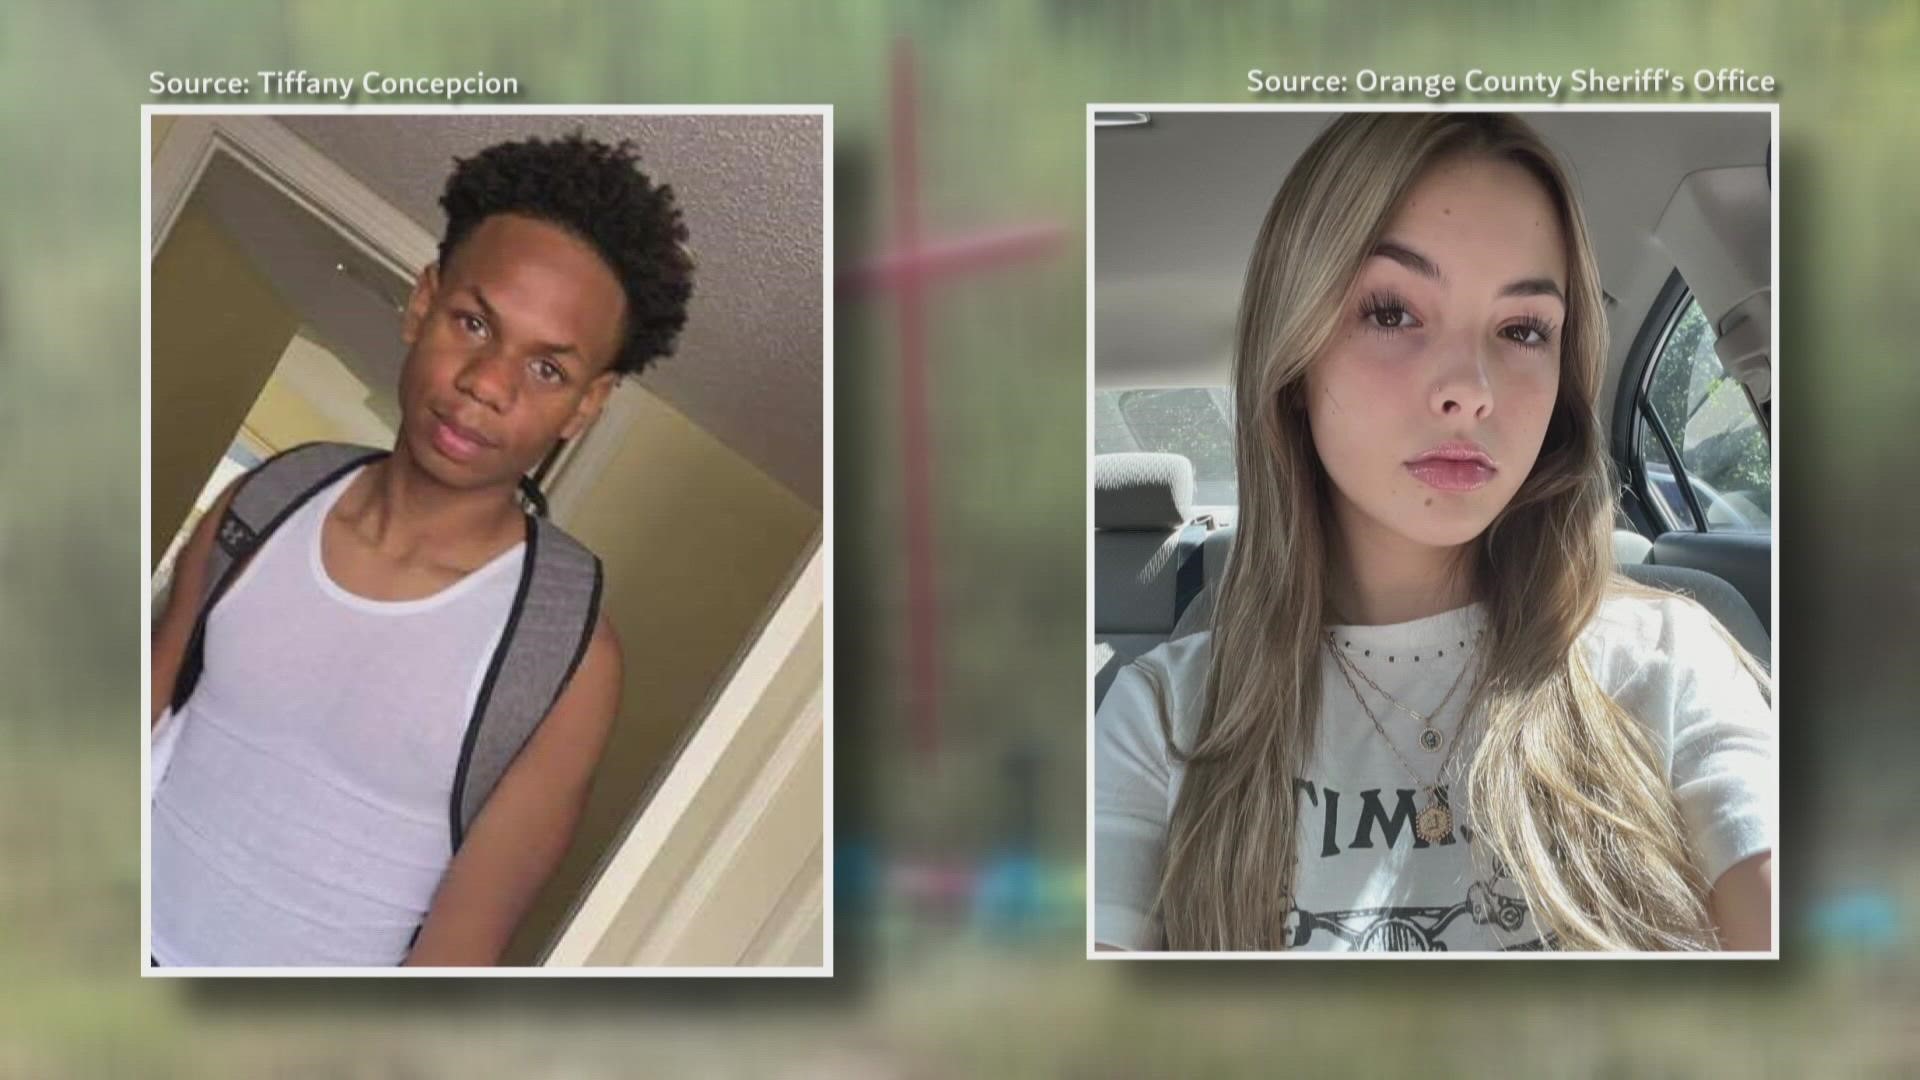 The Orange County Sheriff put out a petition out for the 17-year-old suspect's arrest. They asked several other law enforcement agencies to help out.